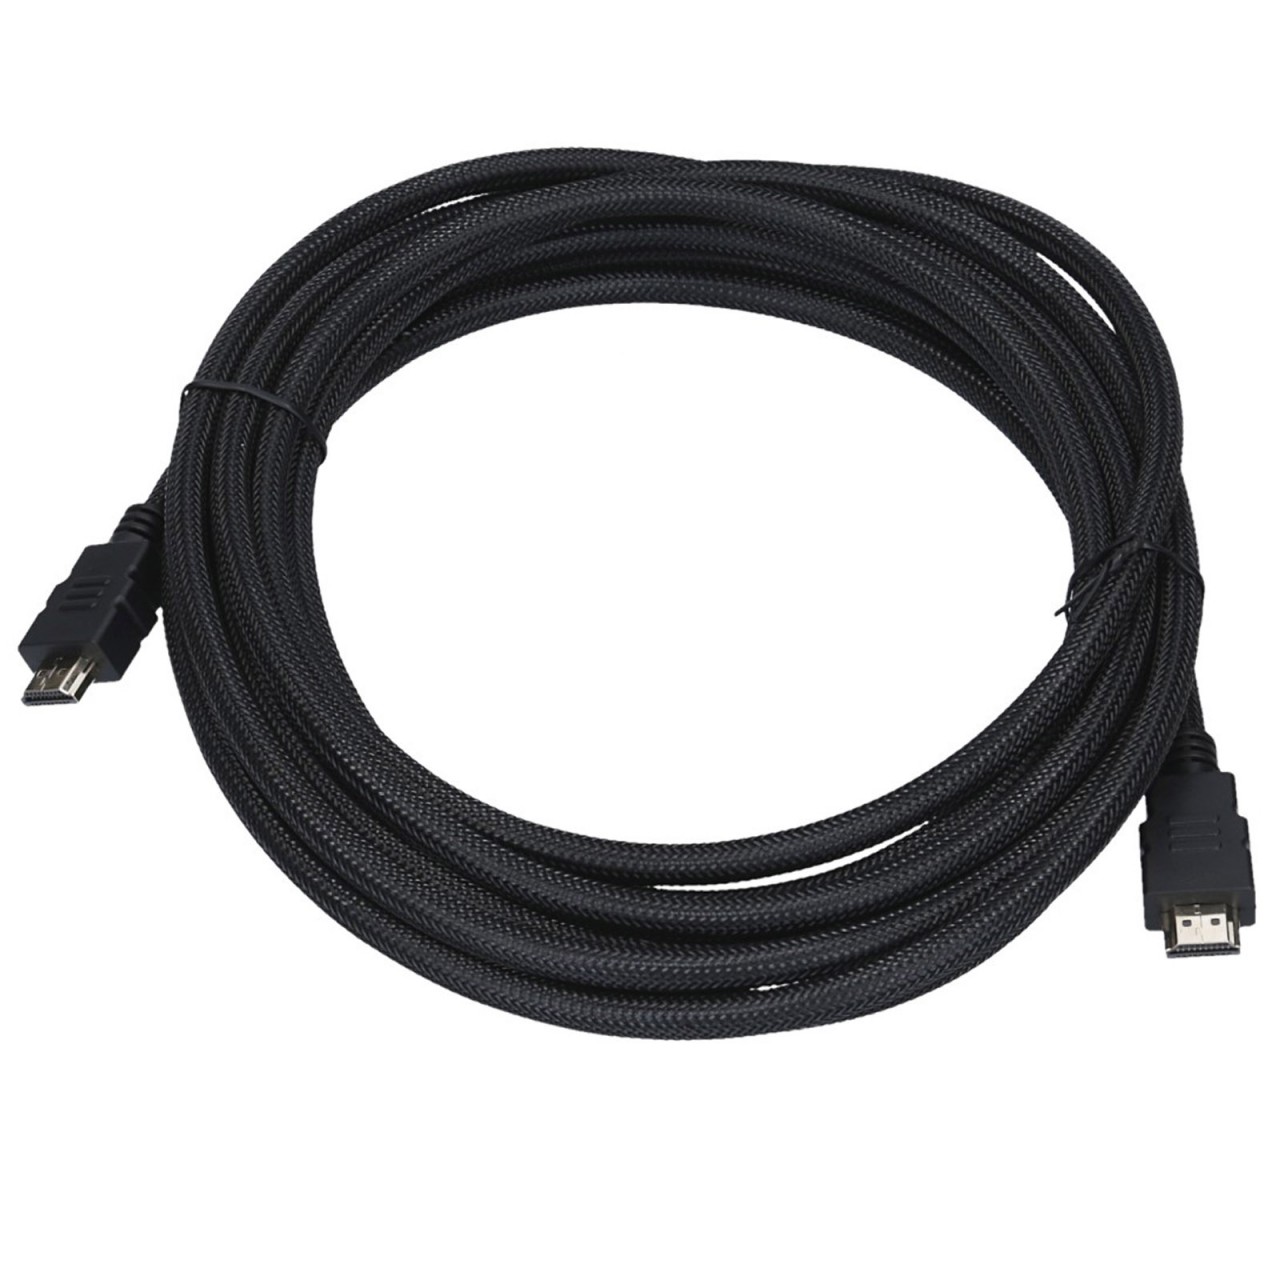 2 m HDMI cable High Speed with Ethernet, HDMI 2.0 4K - ENOVA video cable